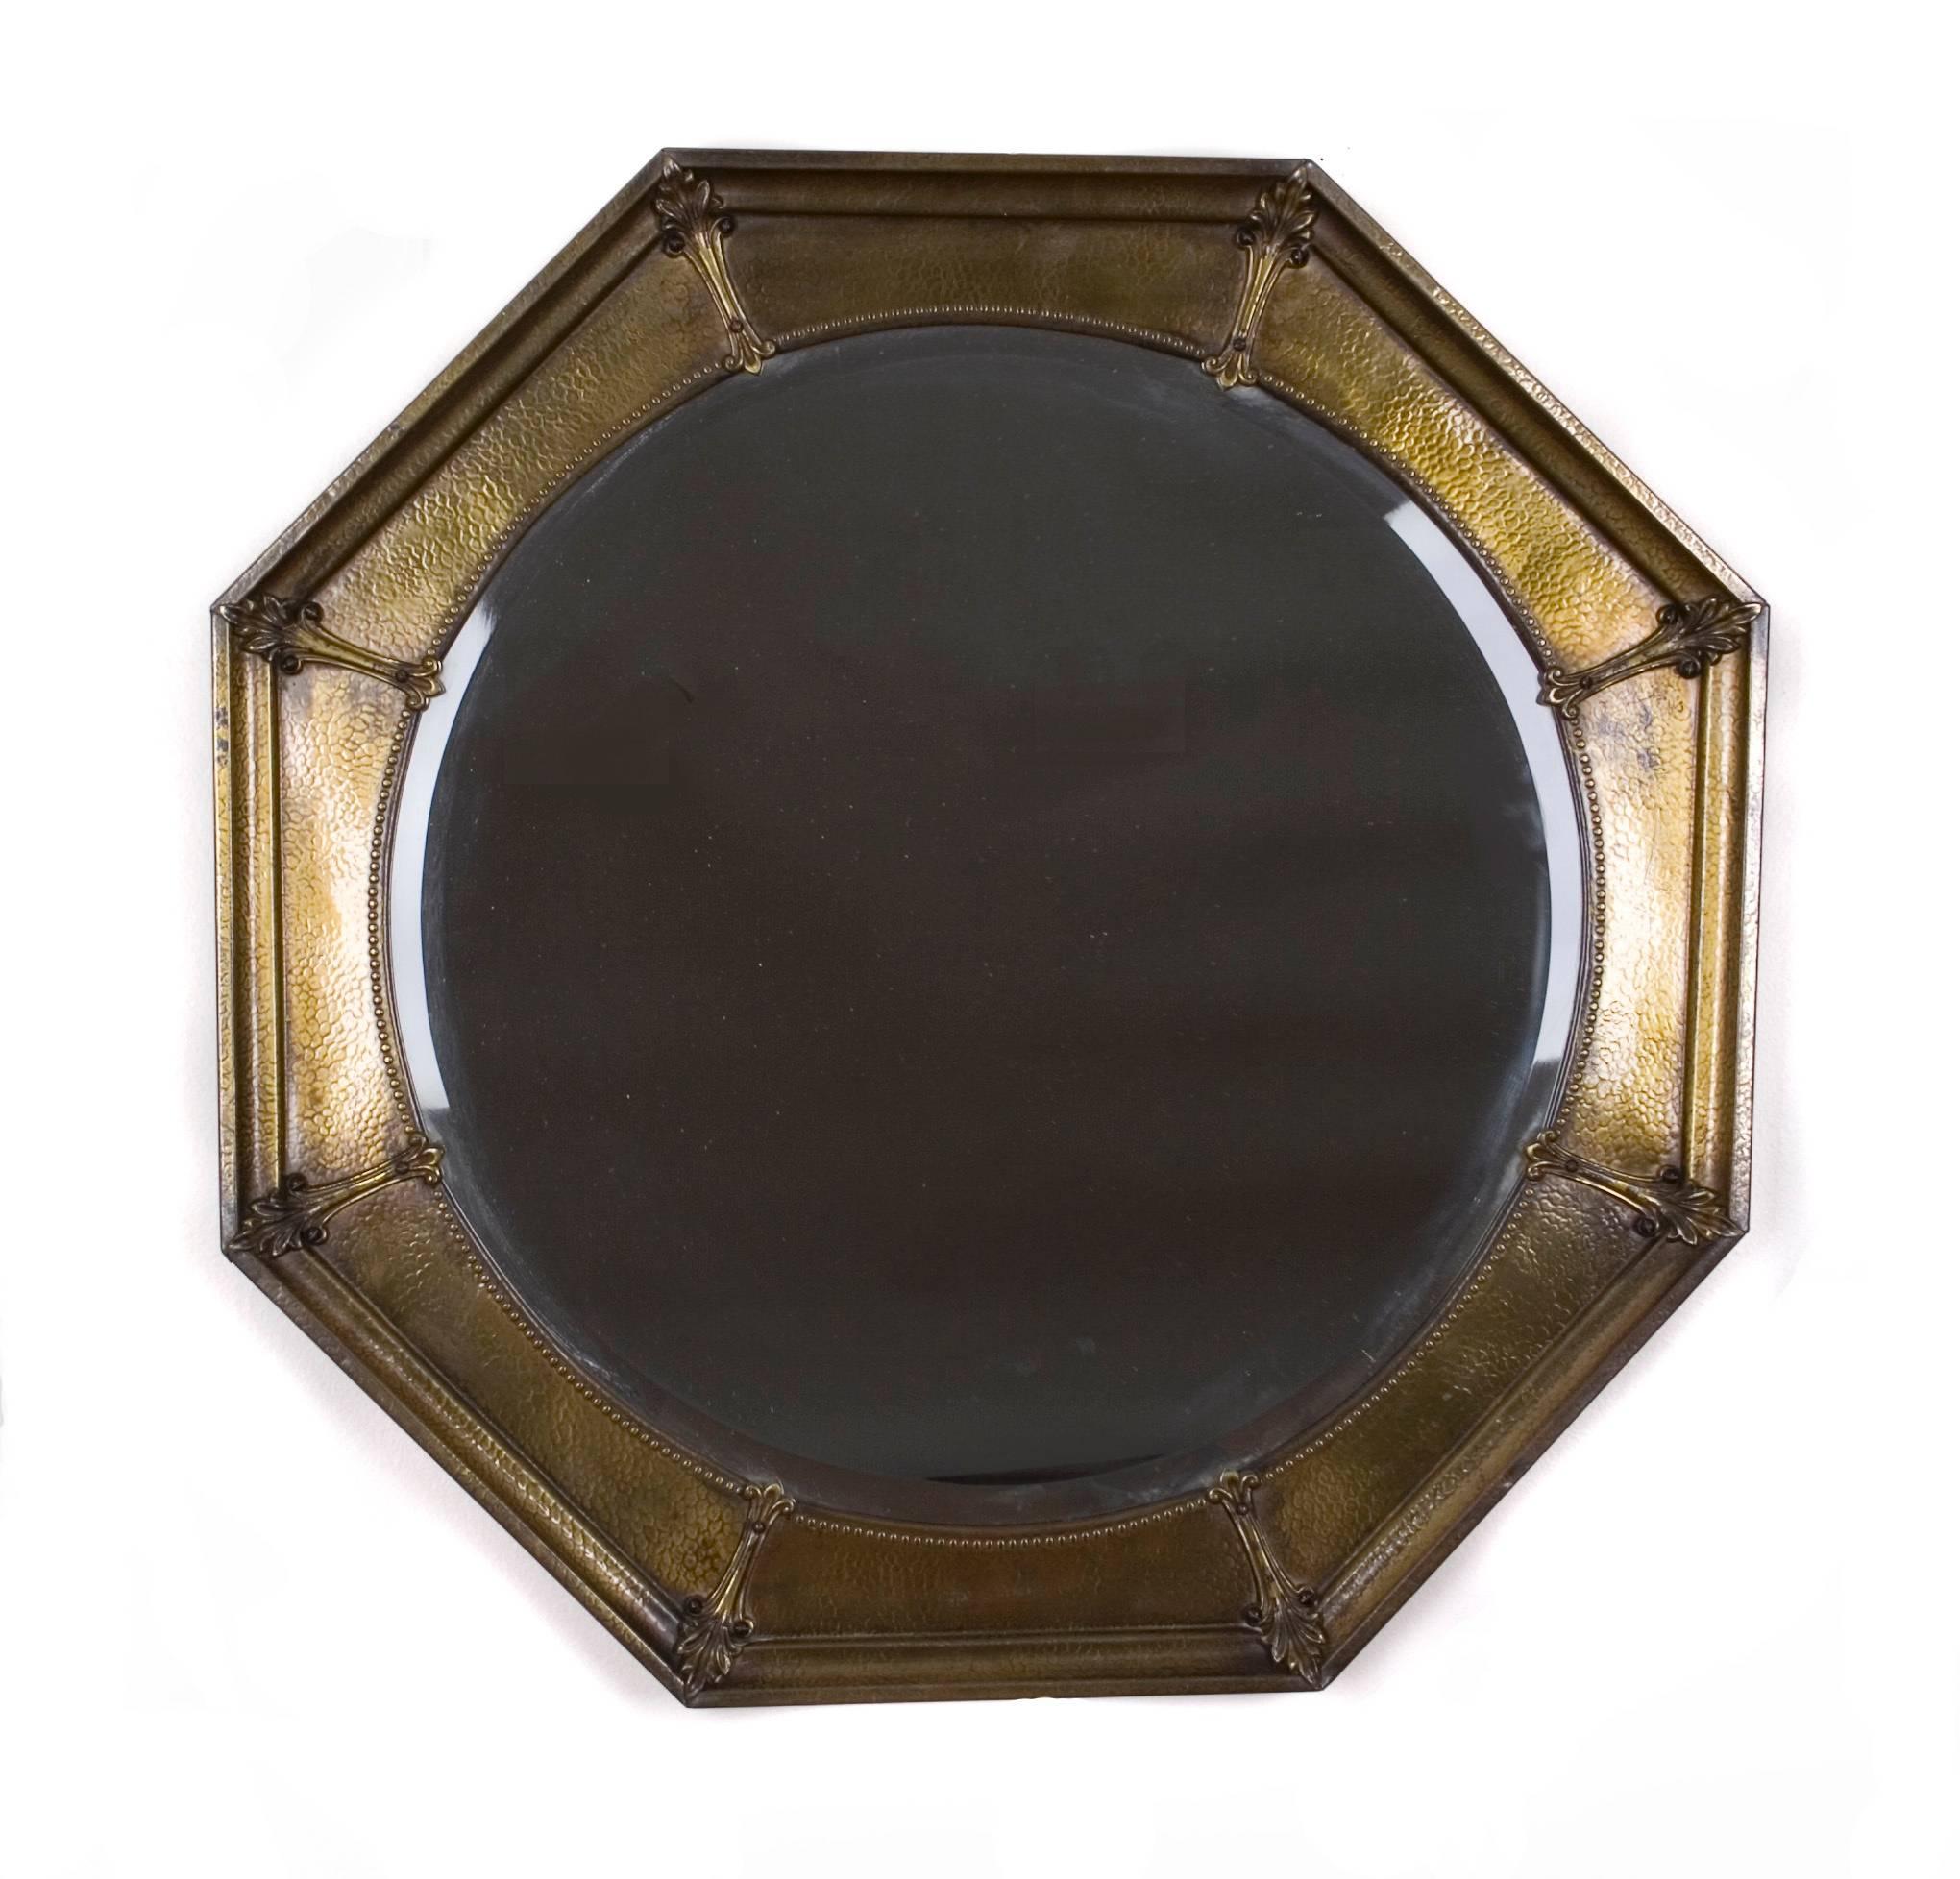 Italian Octagonal Hammered Brass Wall Mirror, Early 20th Century For Sale